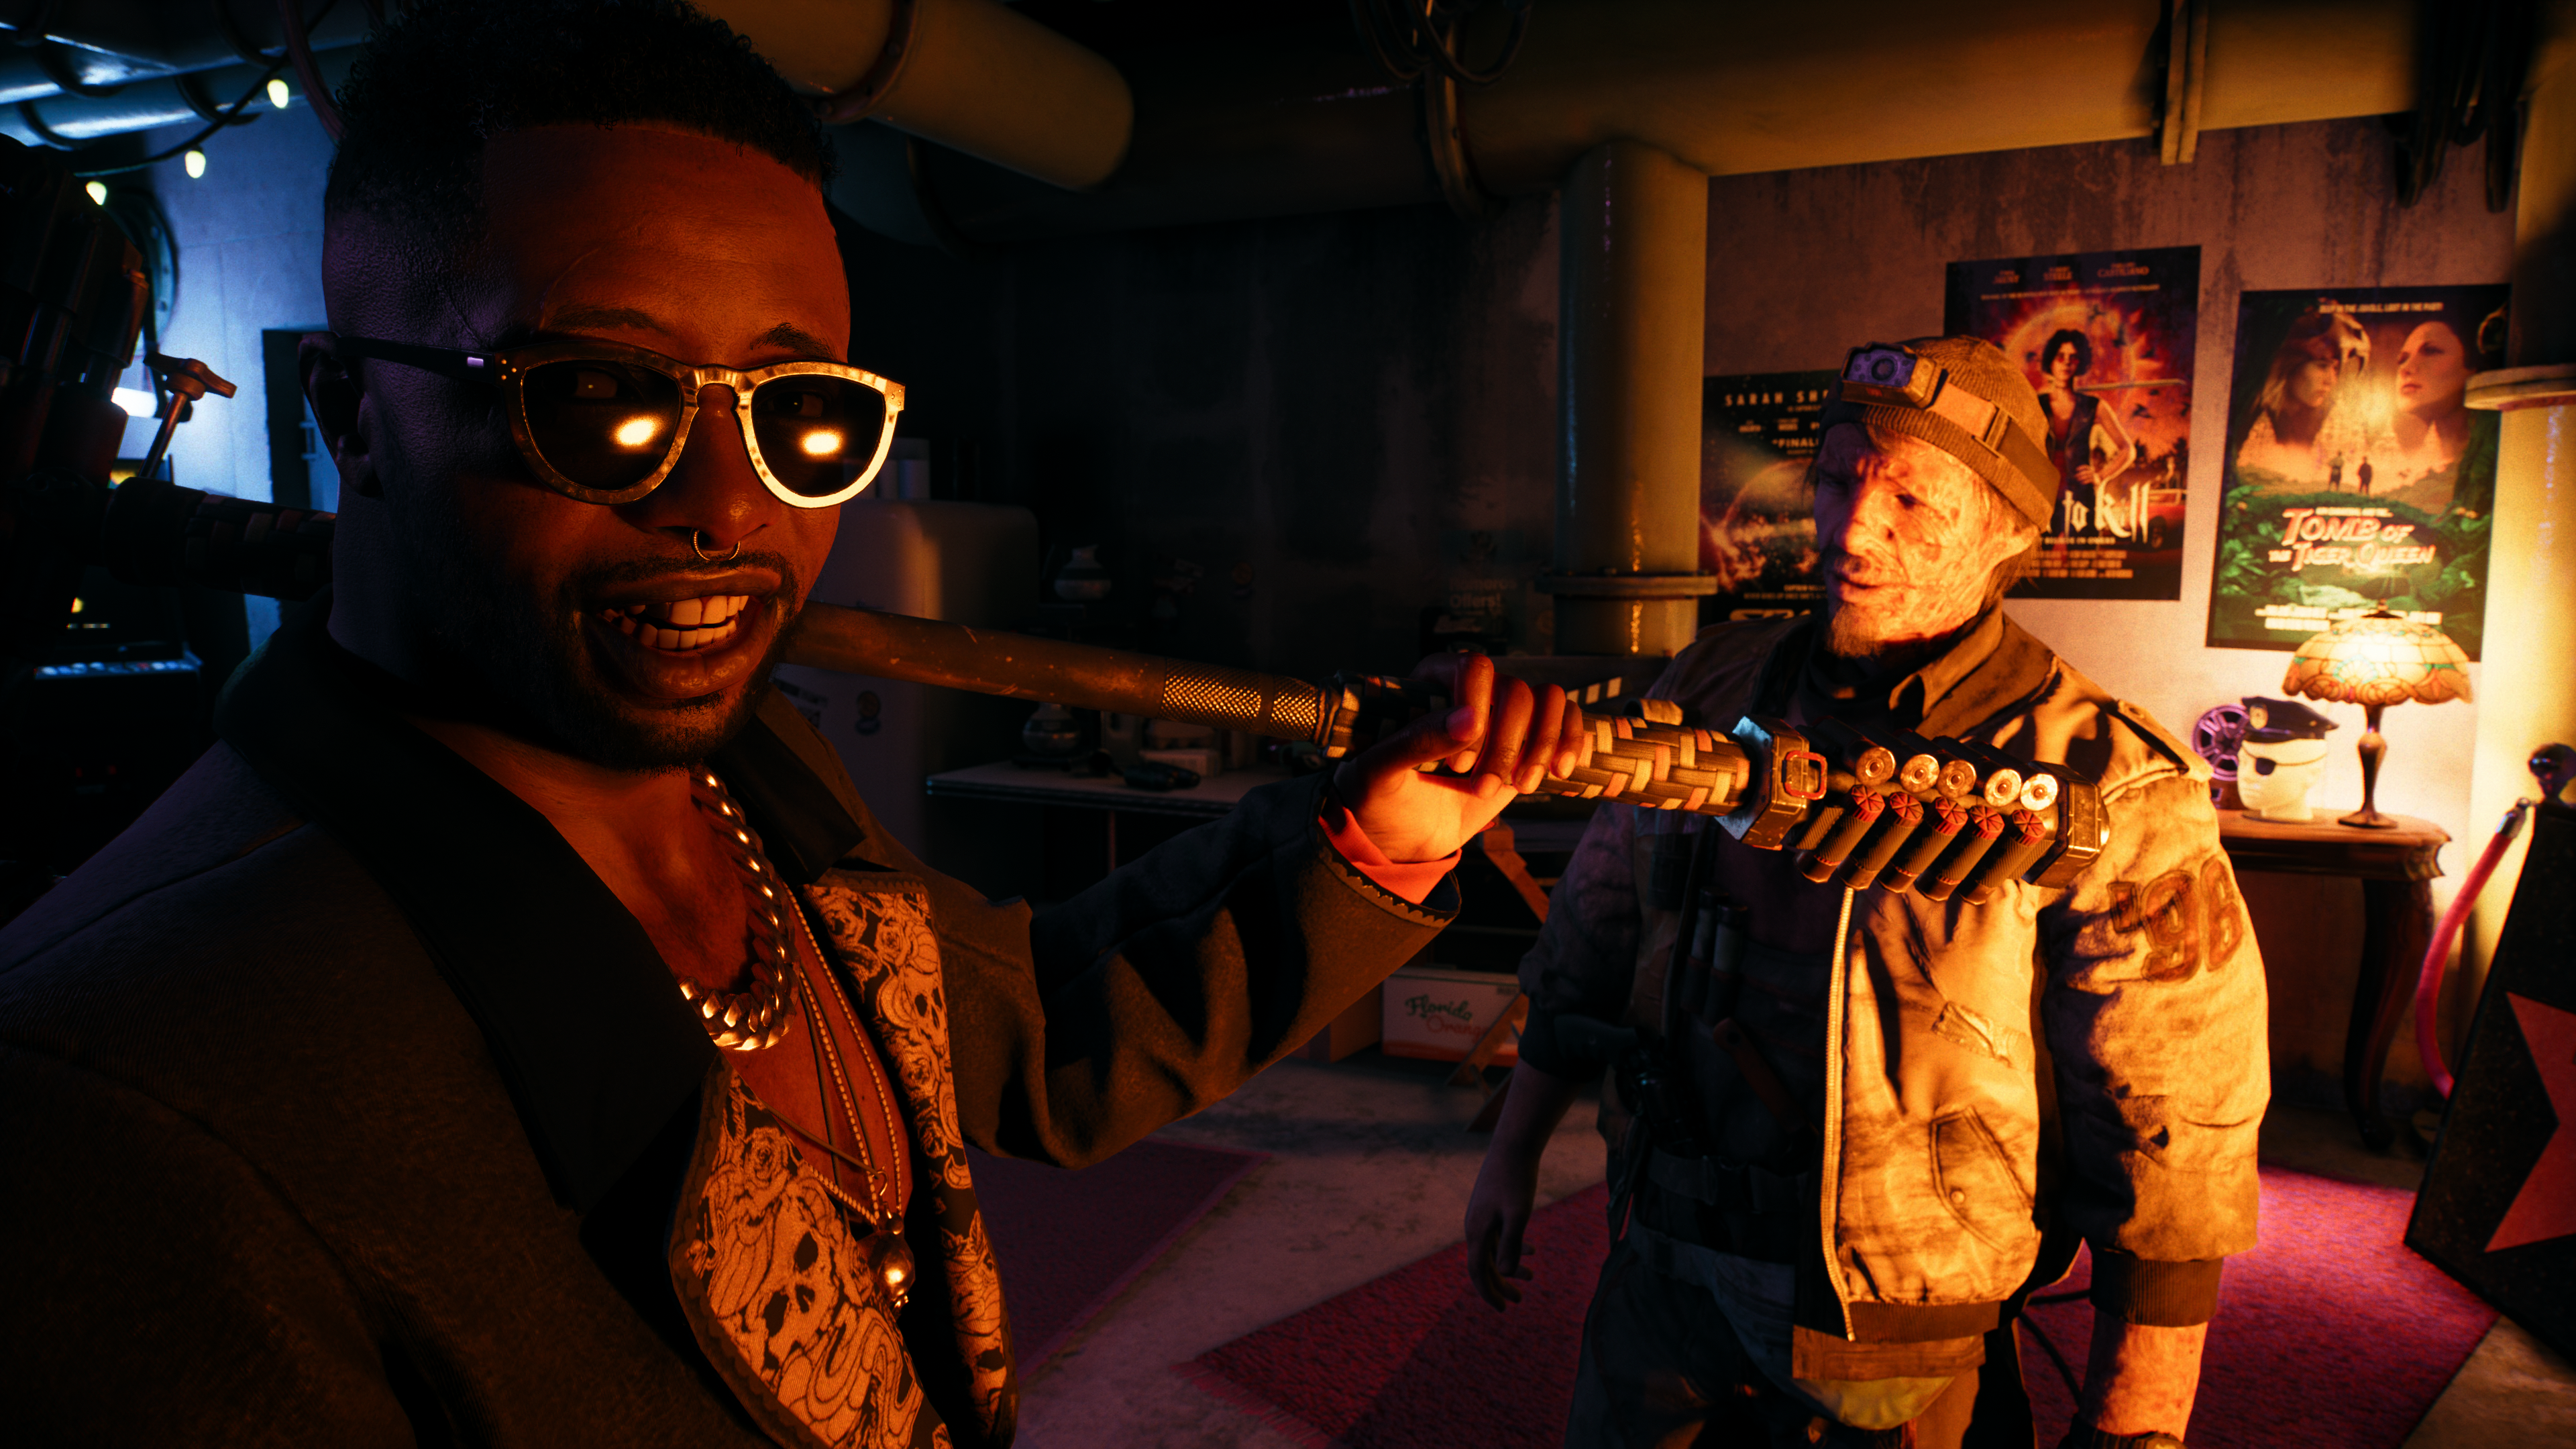 It's Sam B from Dead Island, now in Dead Island 2! He's in a very good mood and is holding a big hammer over his shoulder